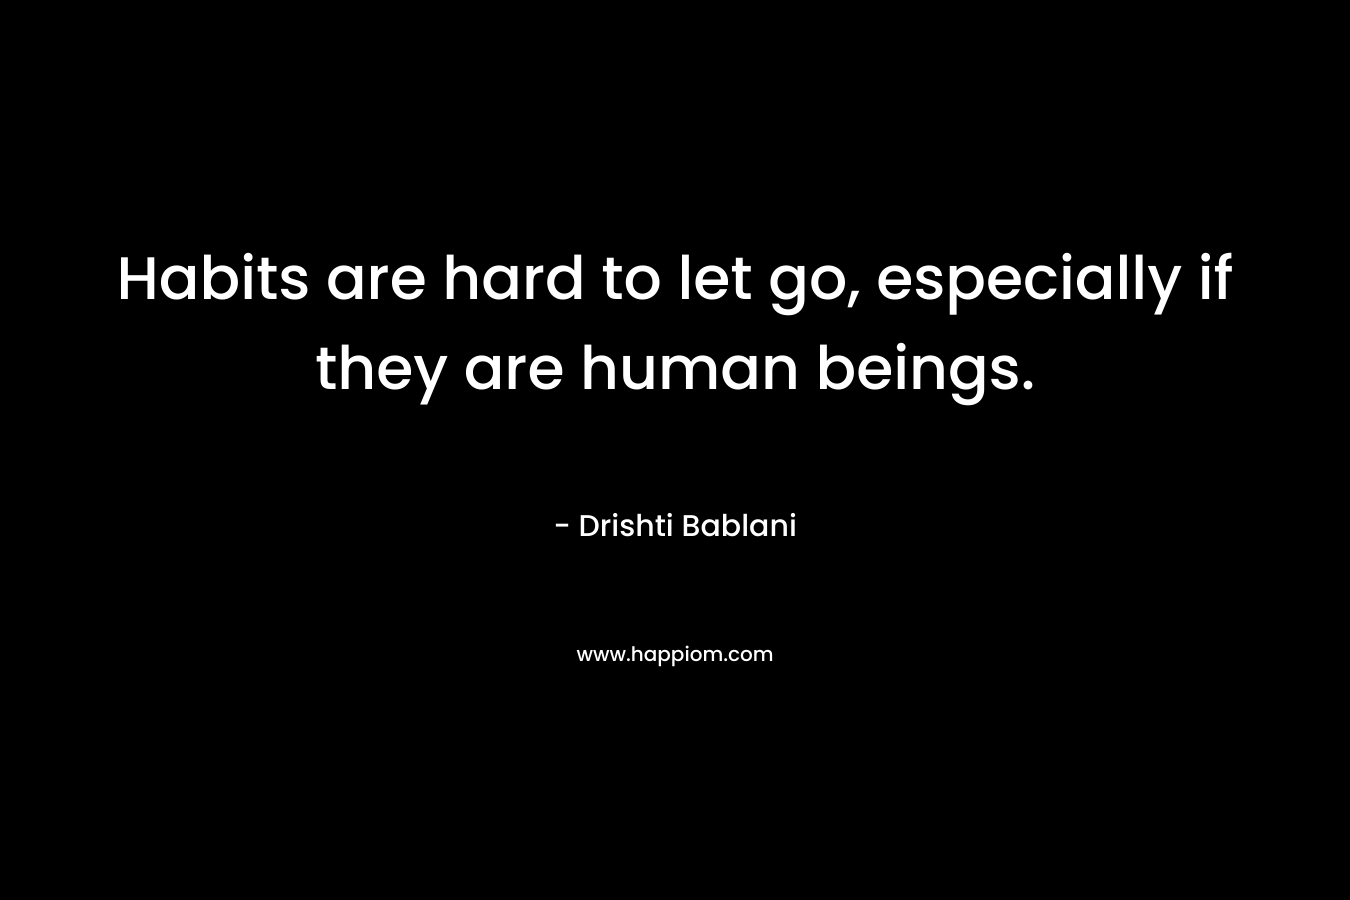 Habits are hard to let go, especially if they are human beings. – Drishti Bablani